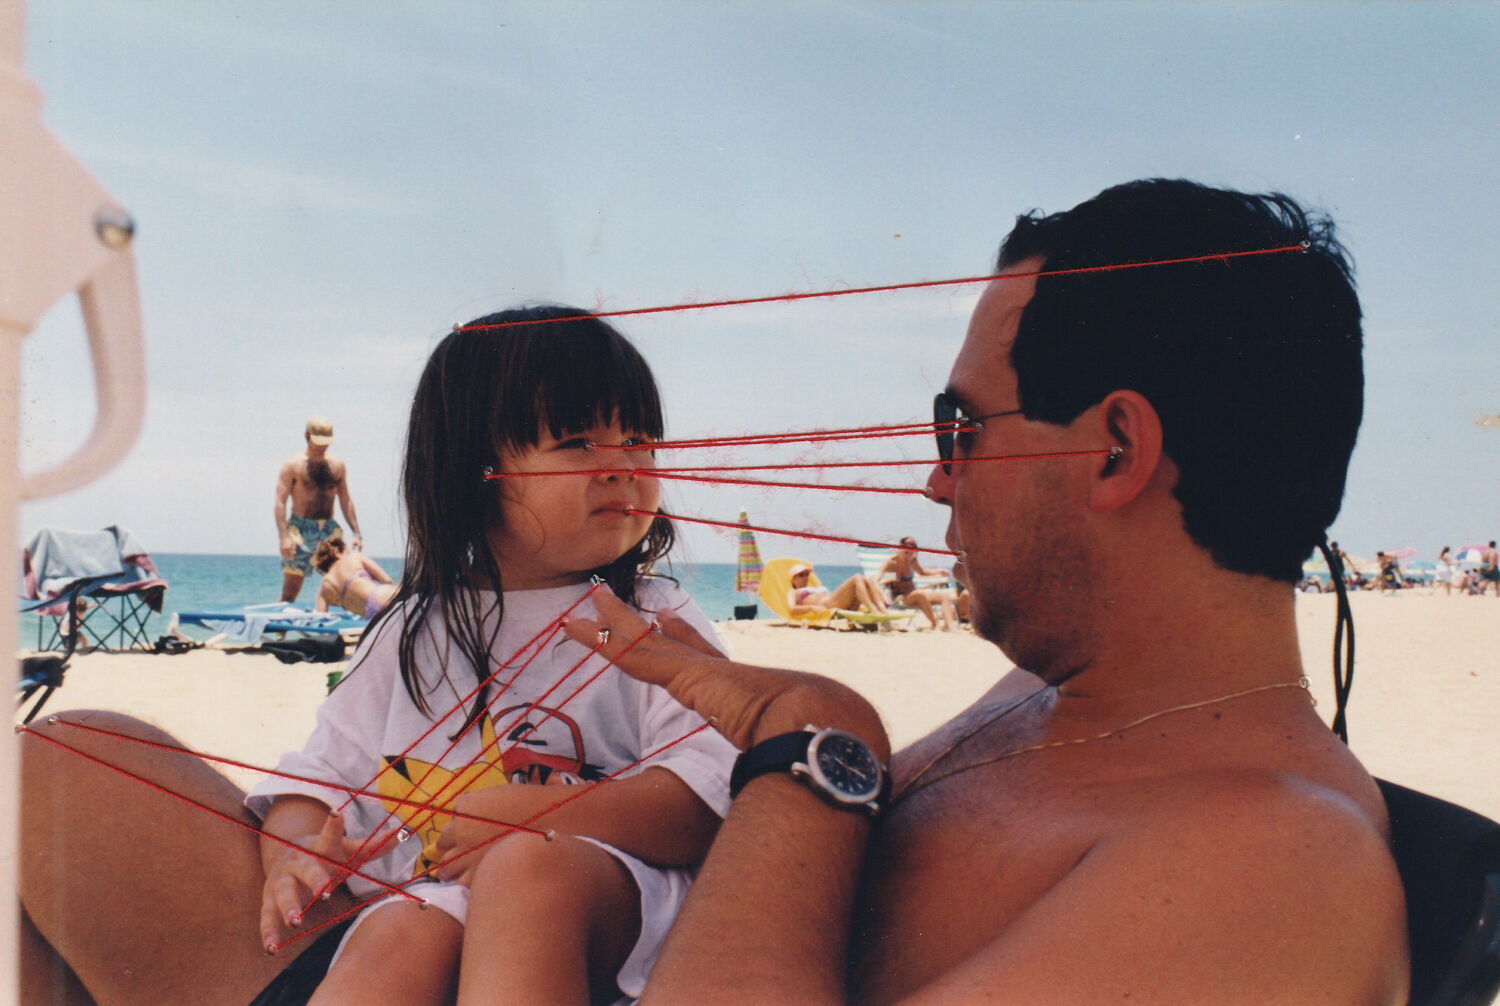 A photograph of a young girl sitting on the lap of a man at the beach. Lines of red thread are attached to the photograph.